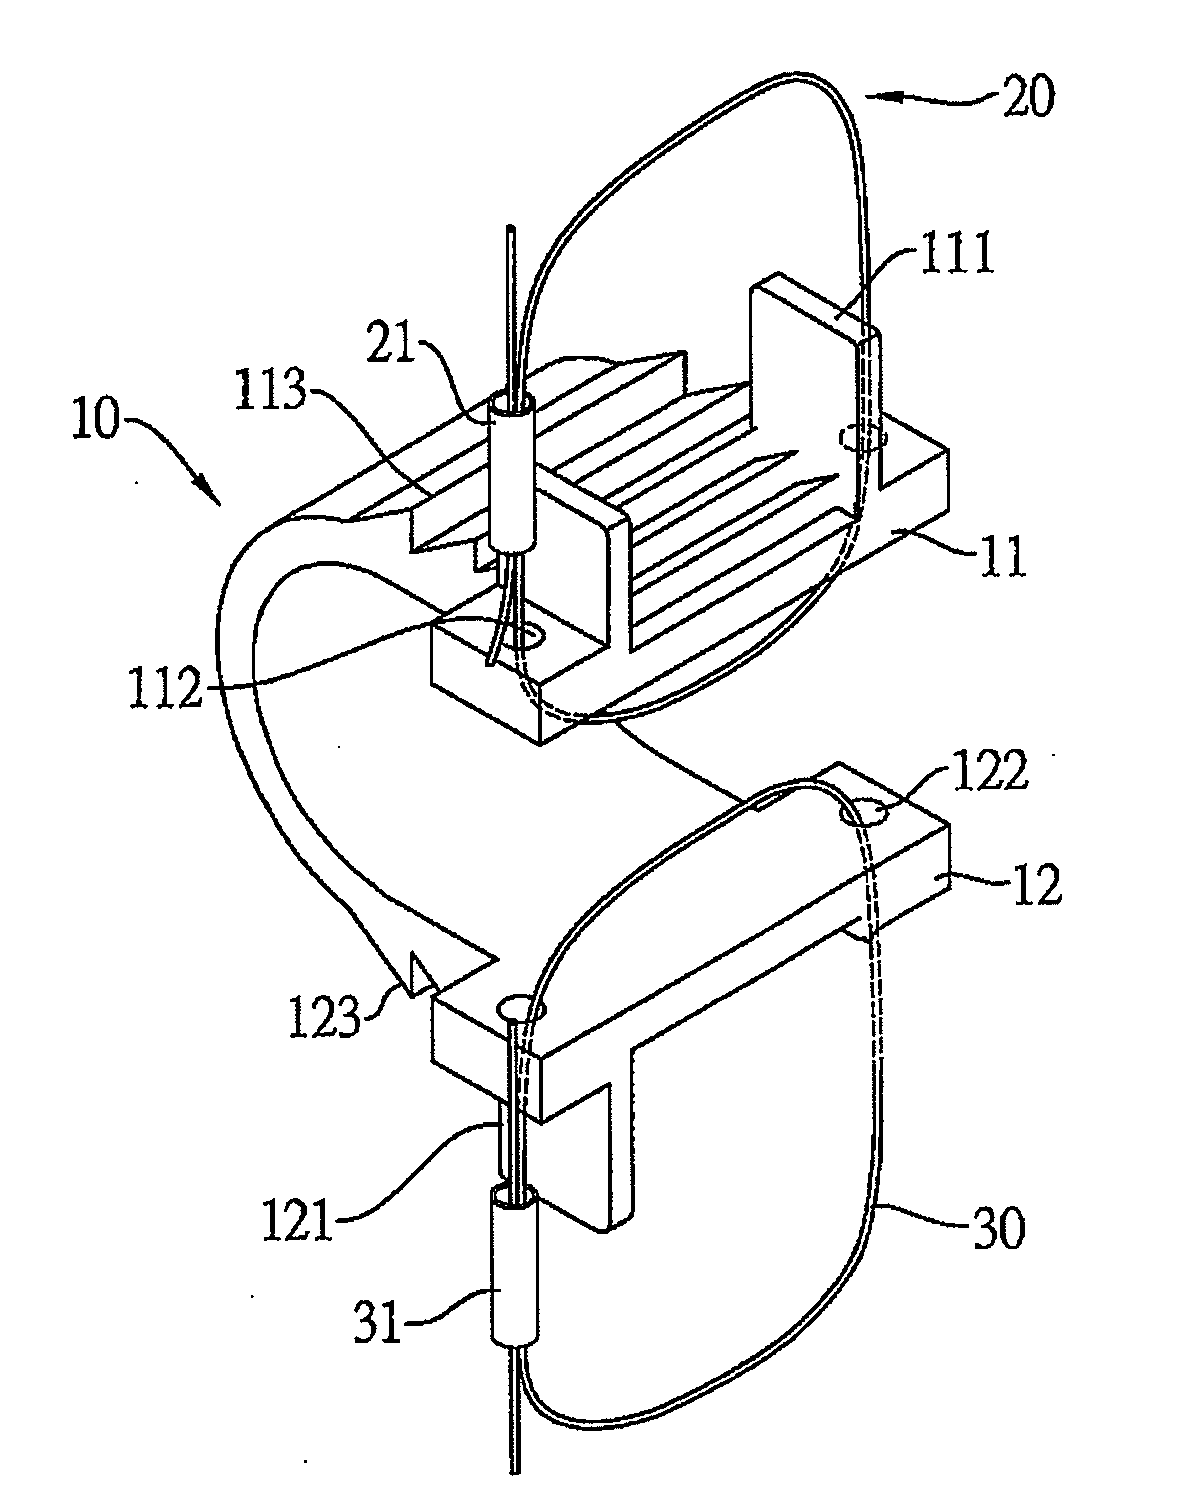 Interspinous process distraction device